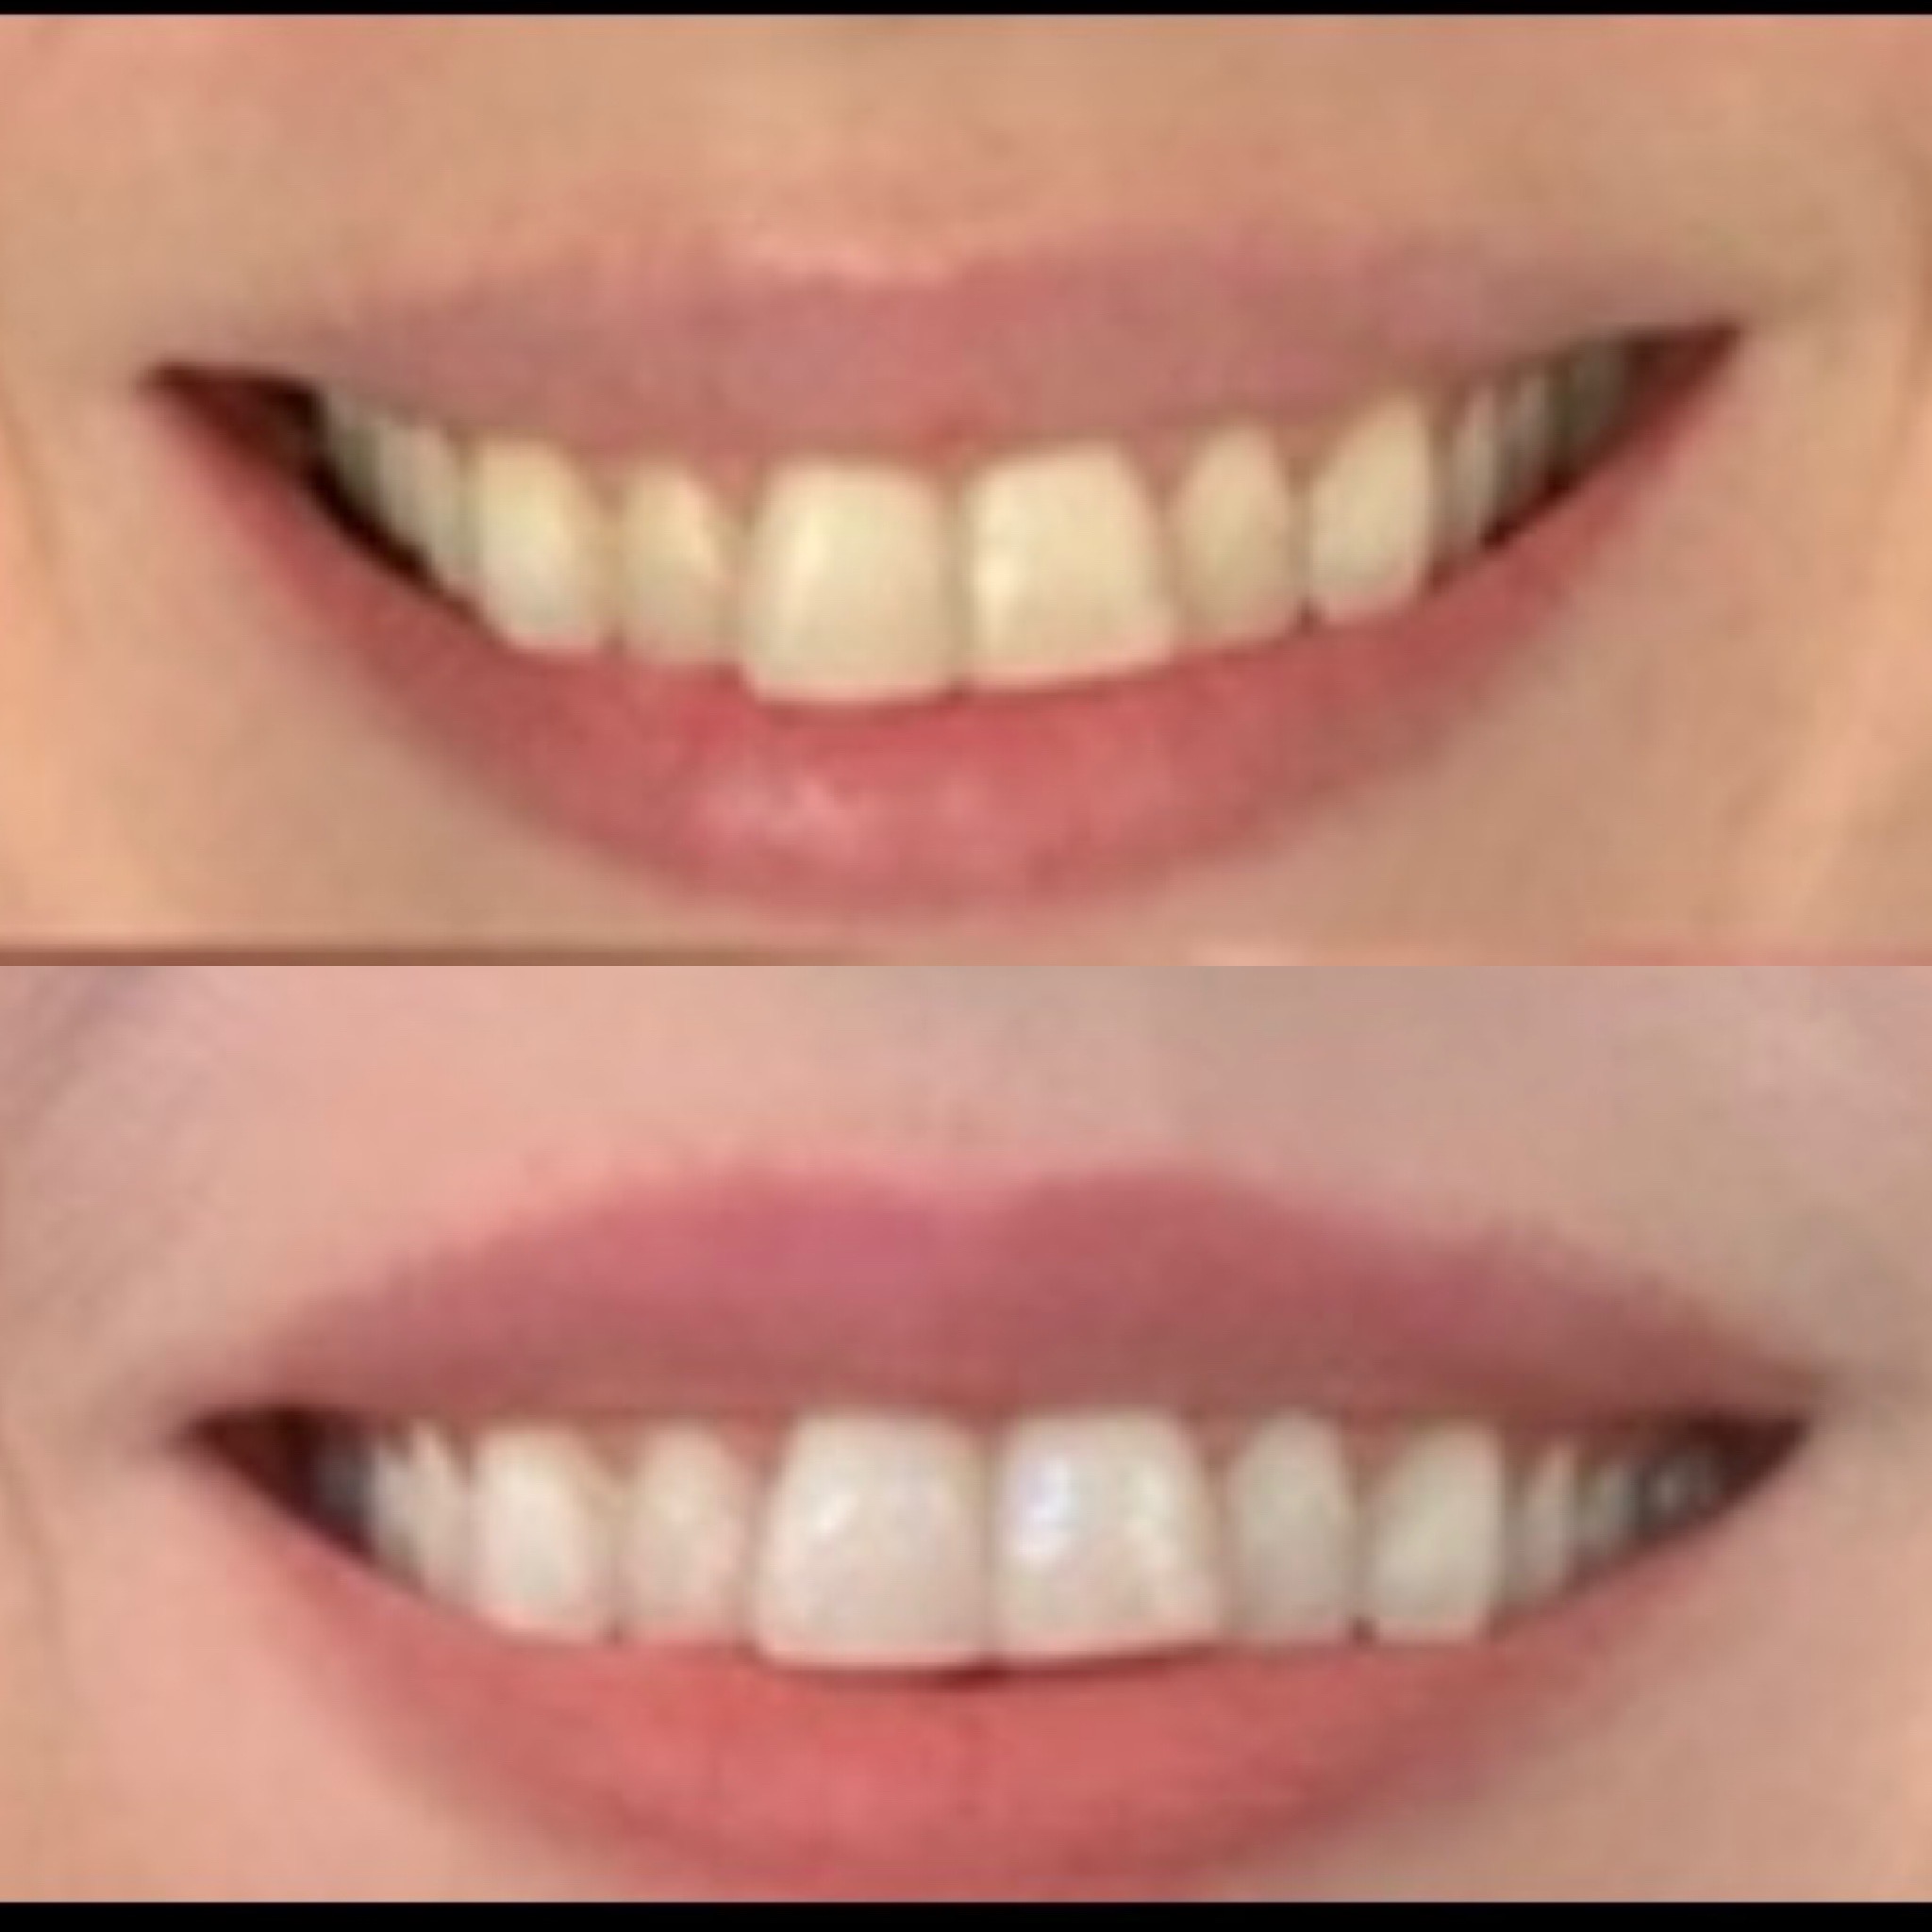 Crest 3D Whitestrips before after